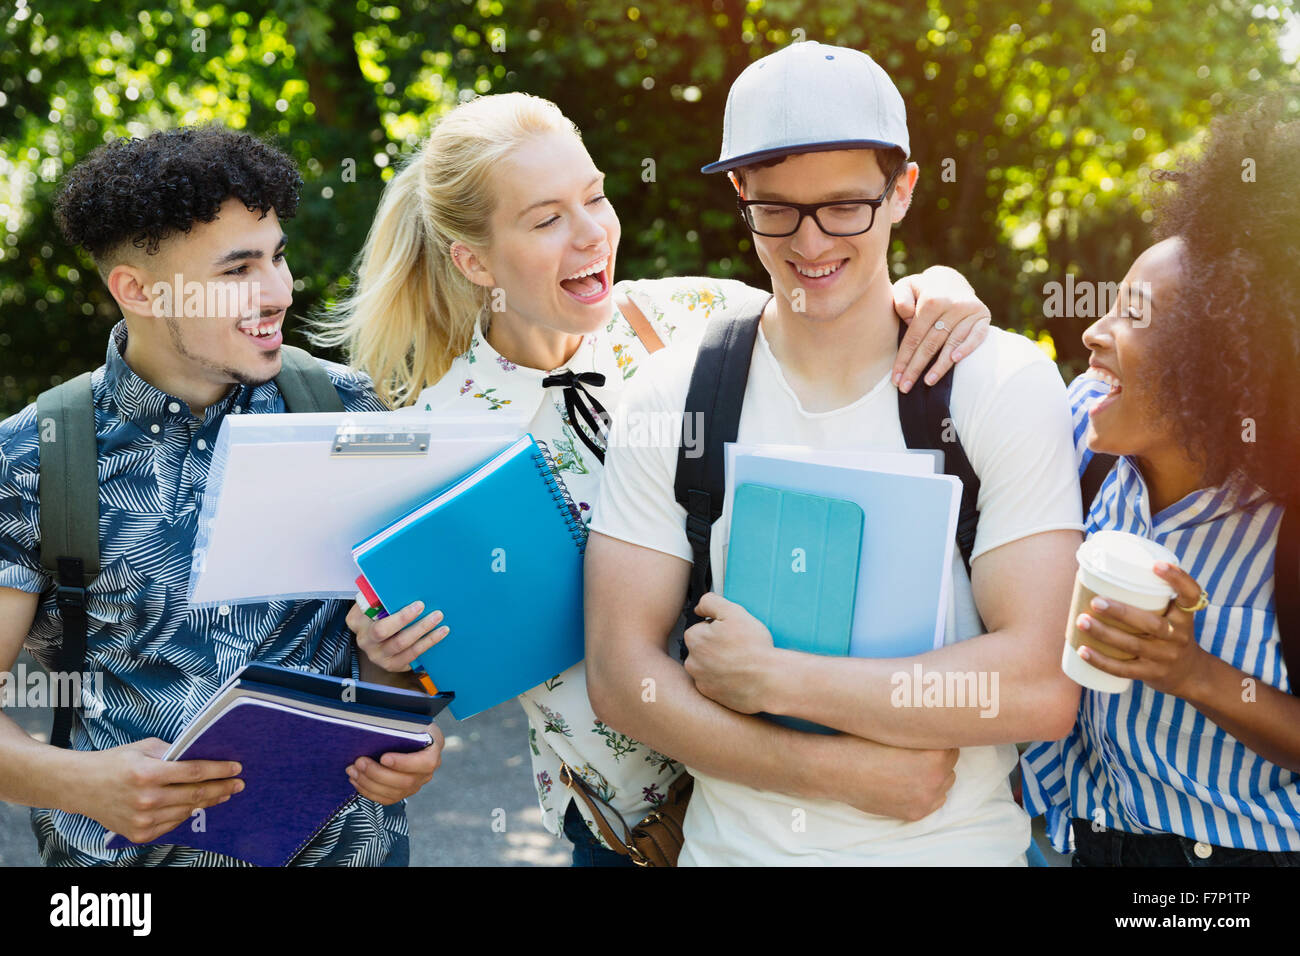 Enthusiastic college students joking friend outside Stock Photo